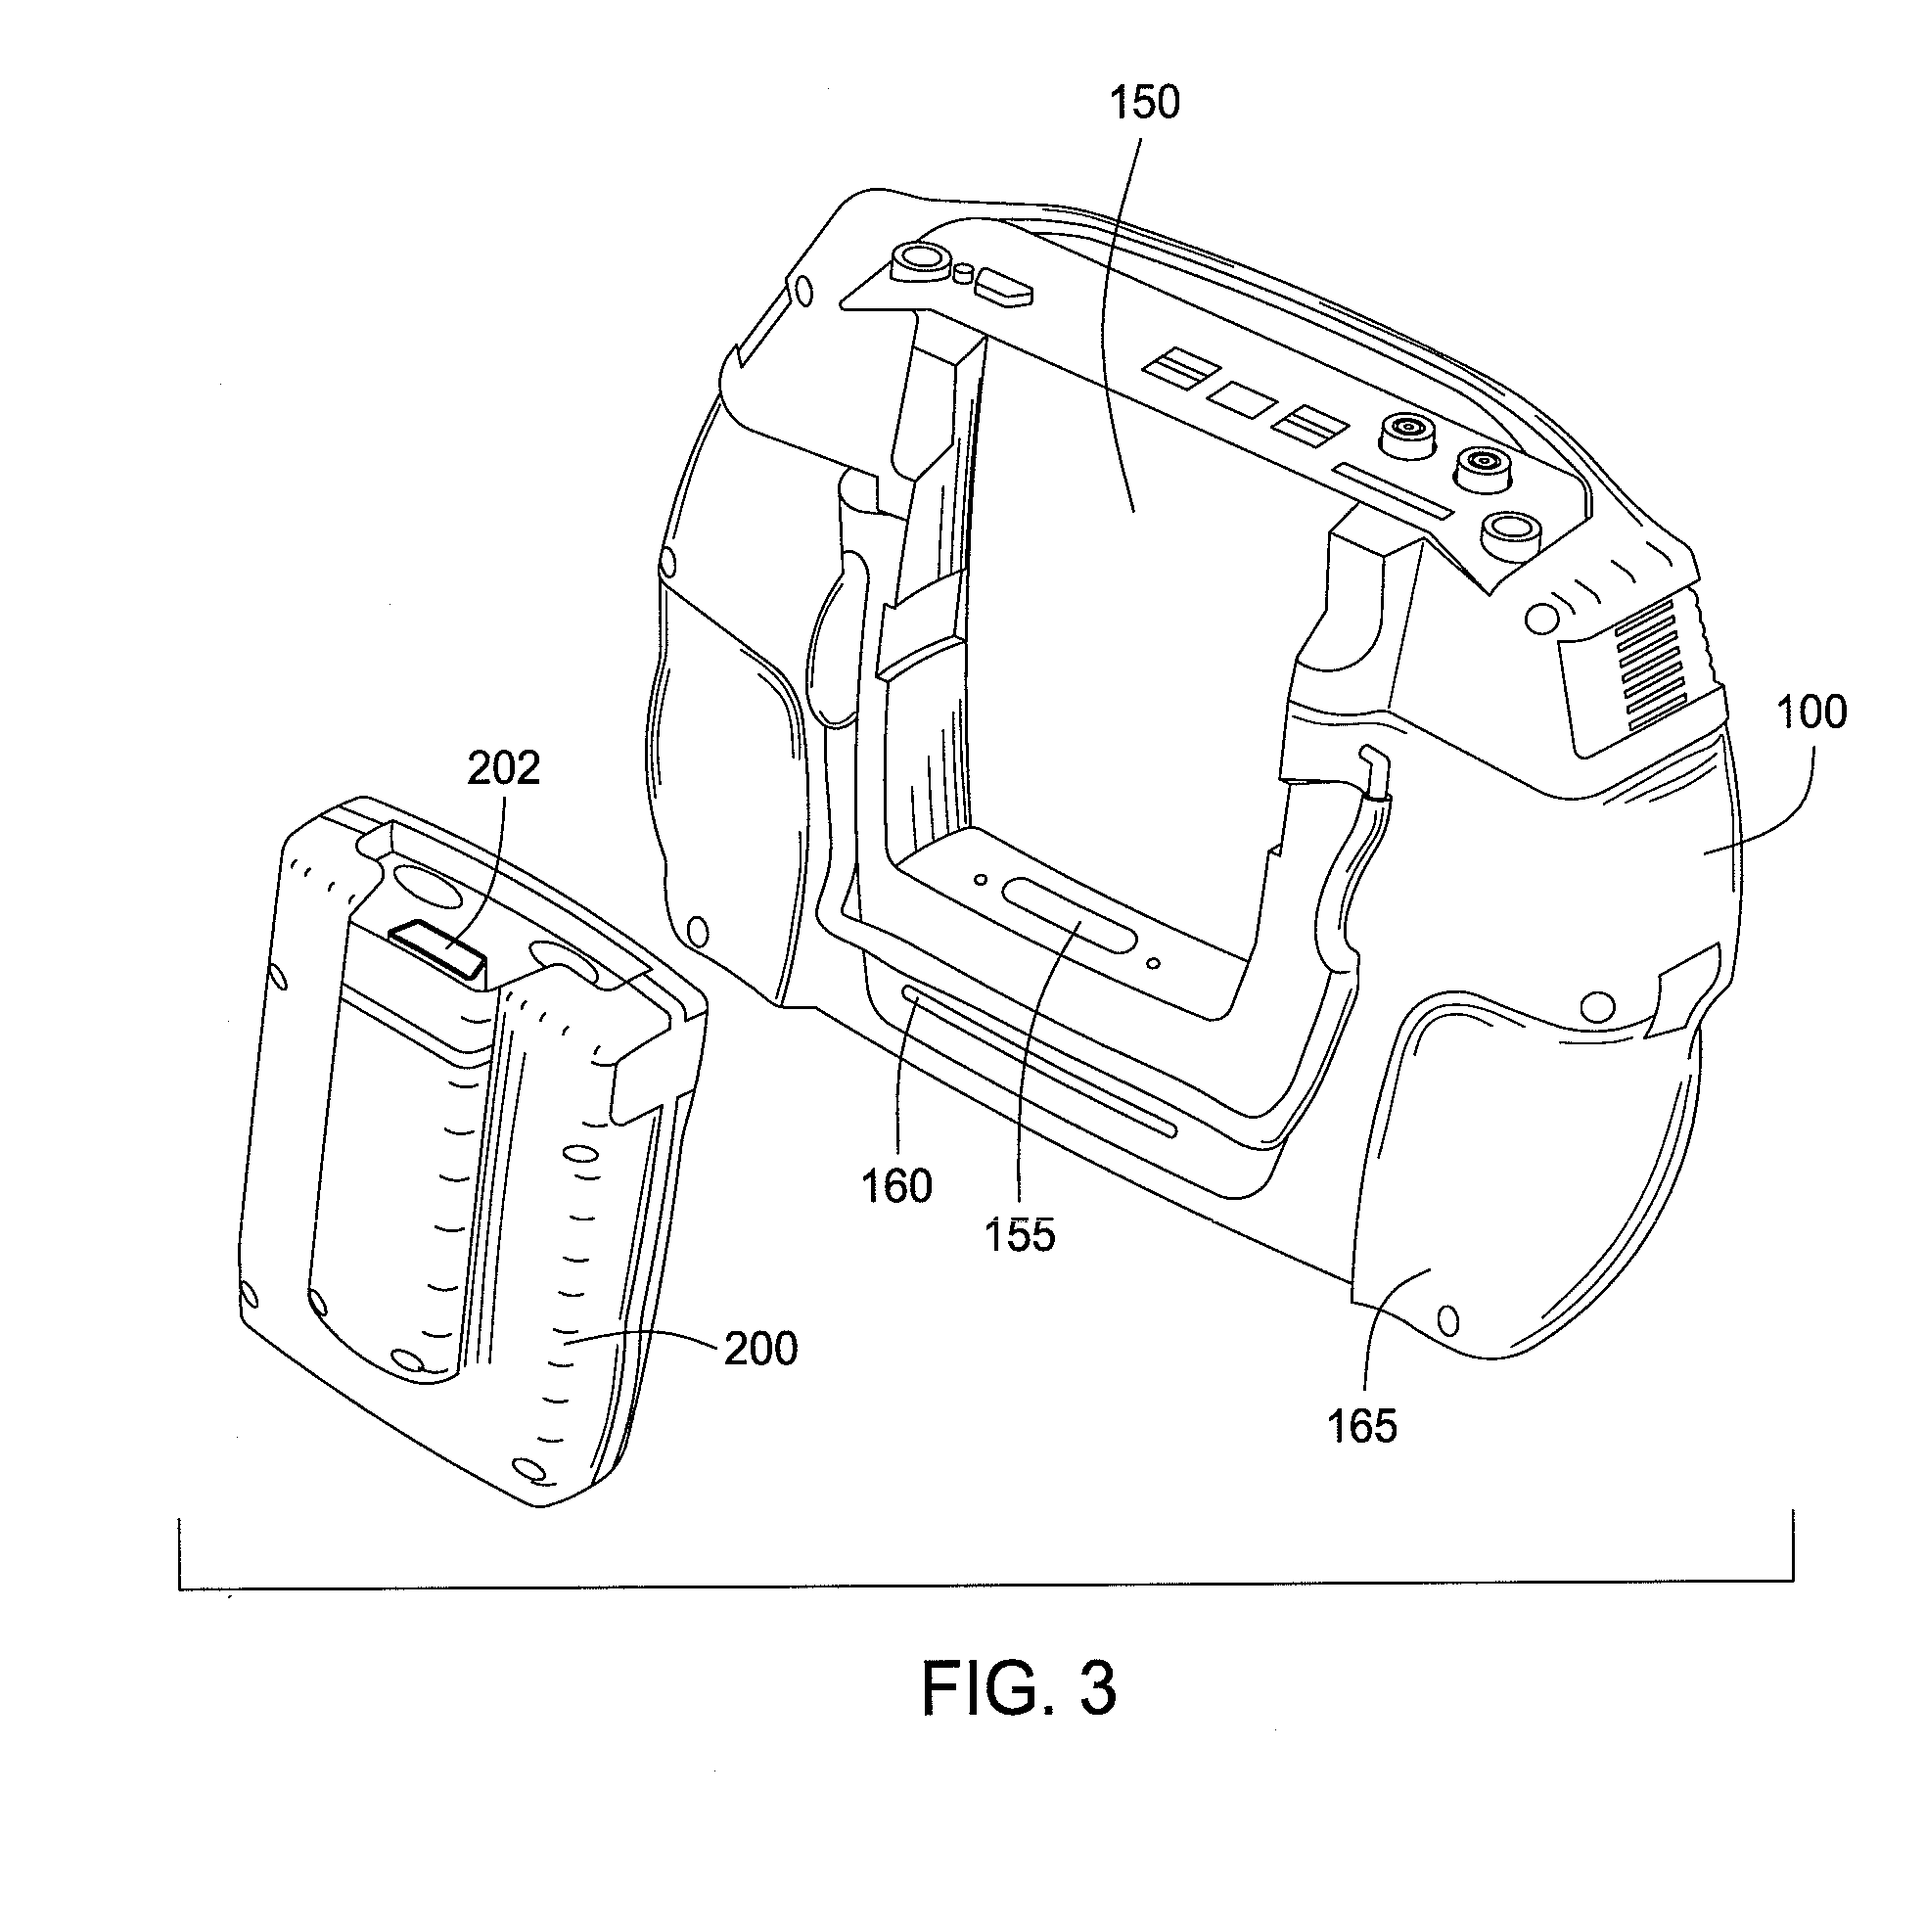 Power Balancing for Vehicle Diagnostic Tools